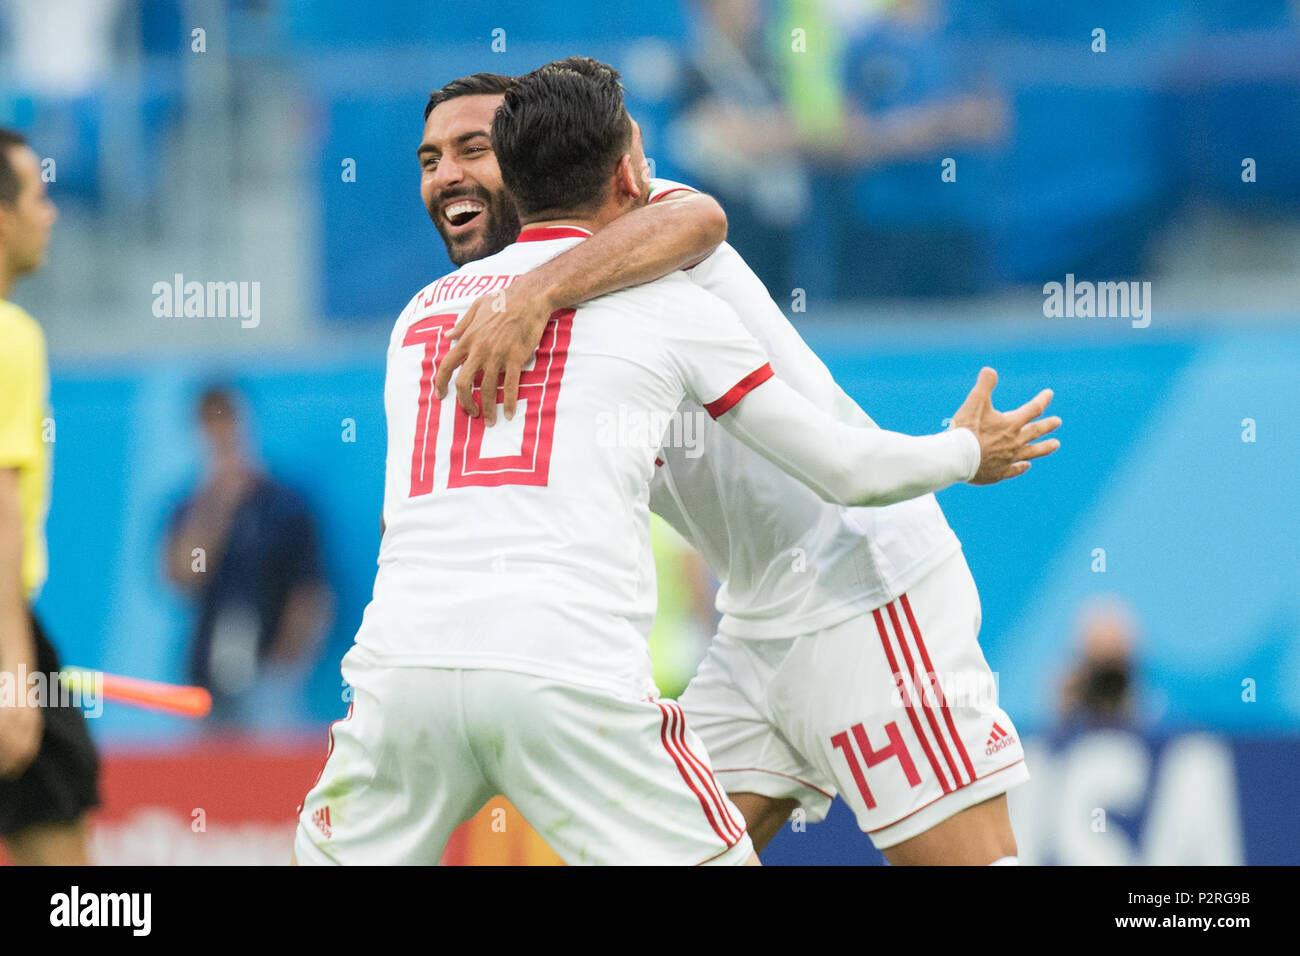 Alireza JAHANBAKHSH (left, IRN) and Saman GHODDOS (IRN) cheer after the game ends, jubilation, cheering, cheering, joy, cheers, celebrate, final jubilation, half figure, half figure, Morocco (MAR) - Iran (IRN) 0 : 1, preliminary round, group B, game 4, on 15.06.2018 in St.Petersburg; Football World Cup 2018 in Russia from 14.06. - 15.07.2018. | usage worldwide Stock Photo